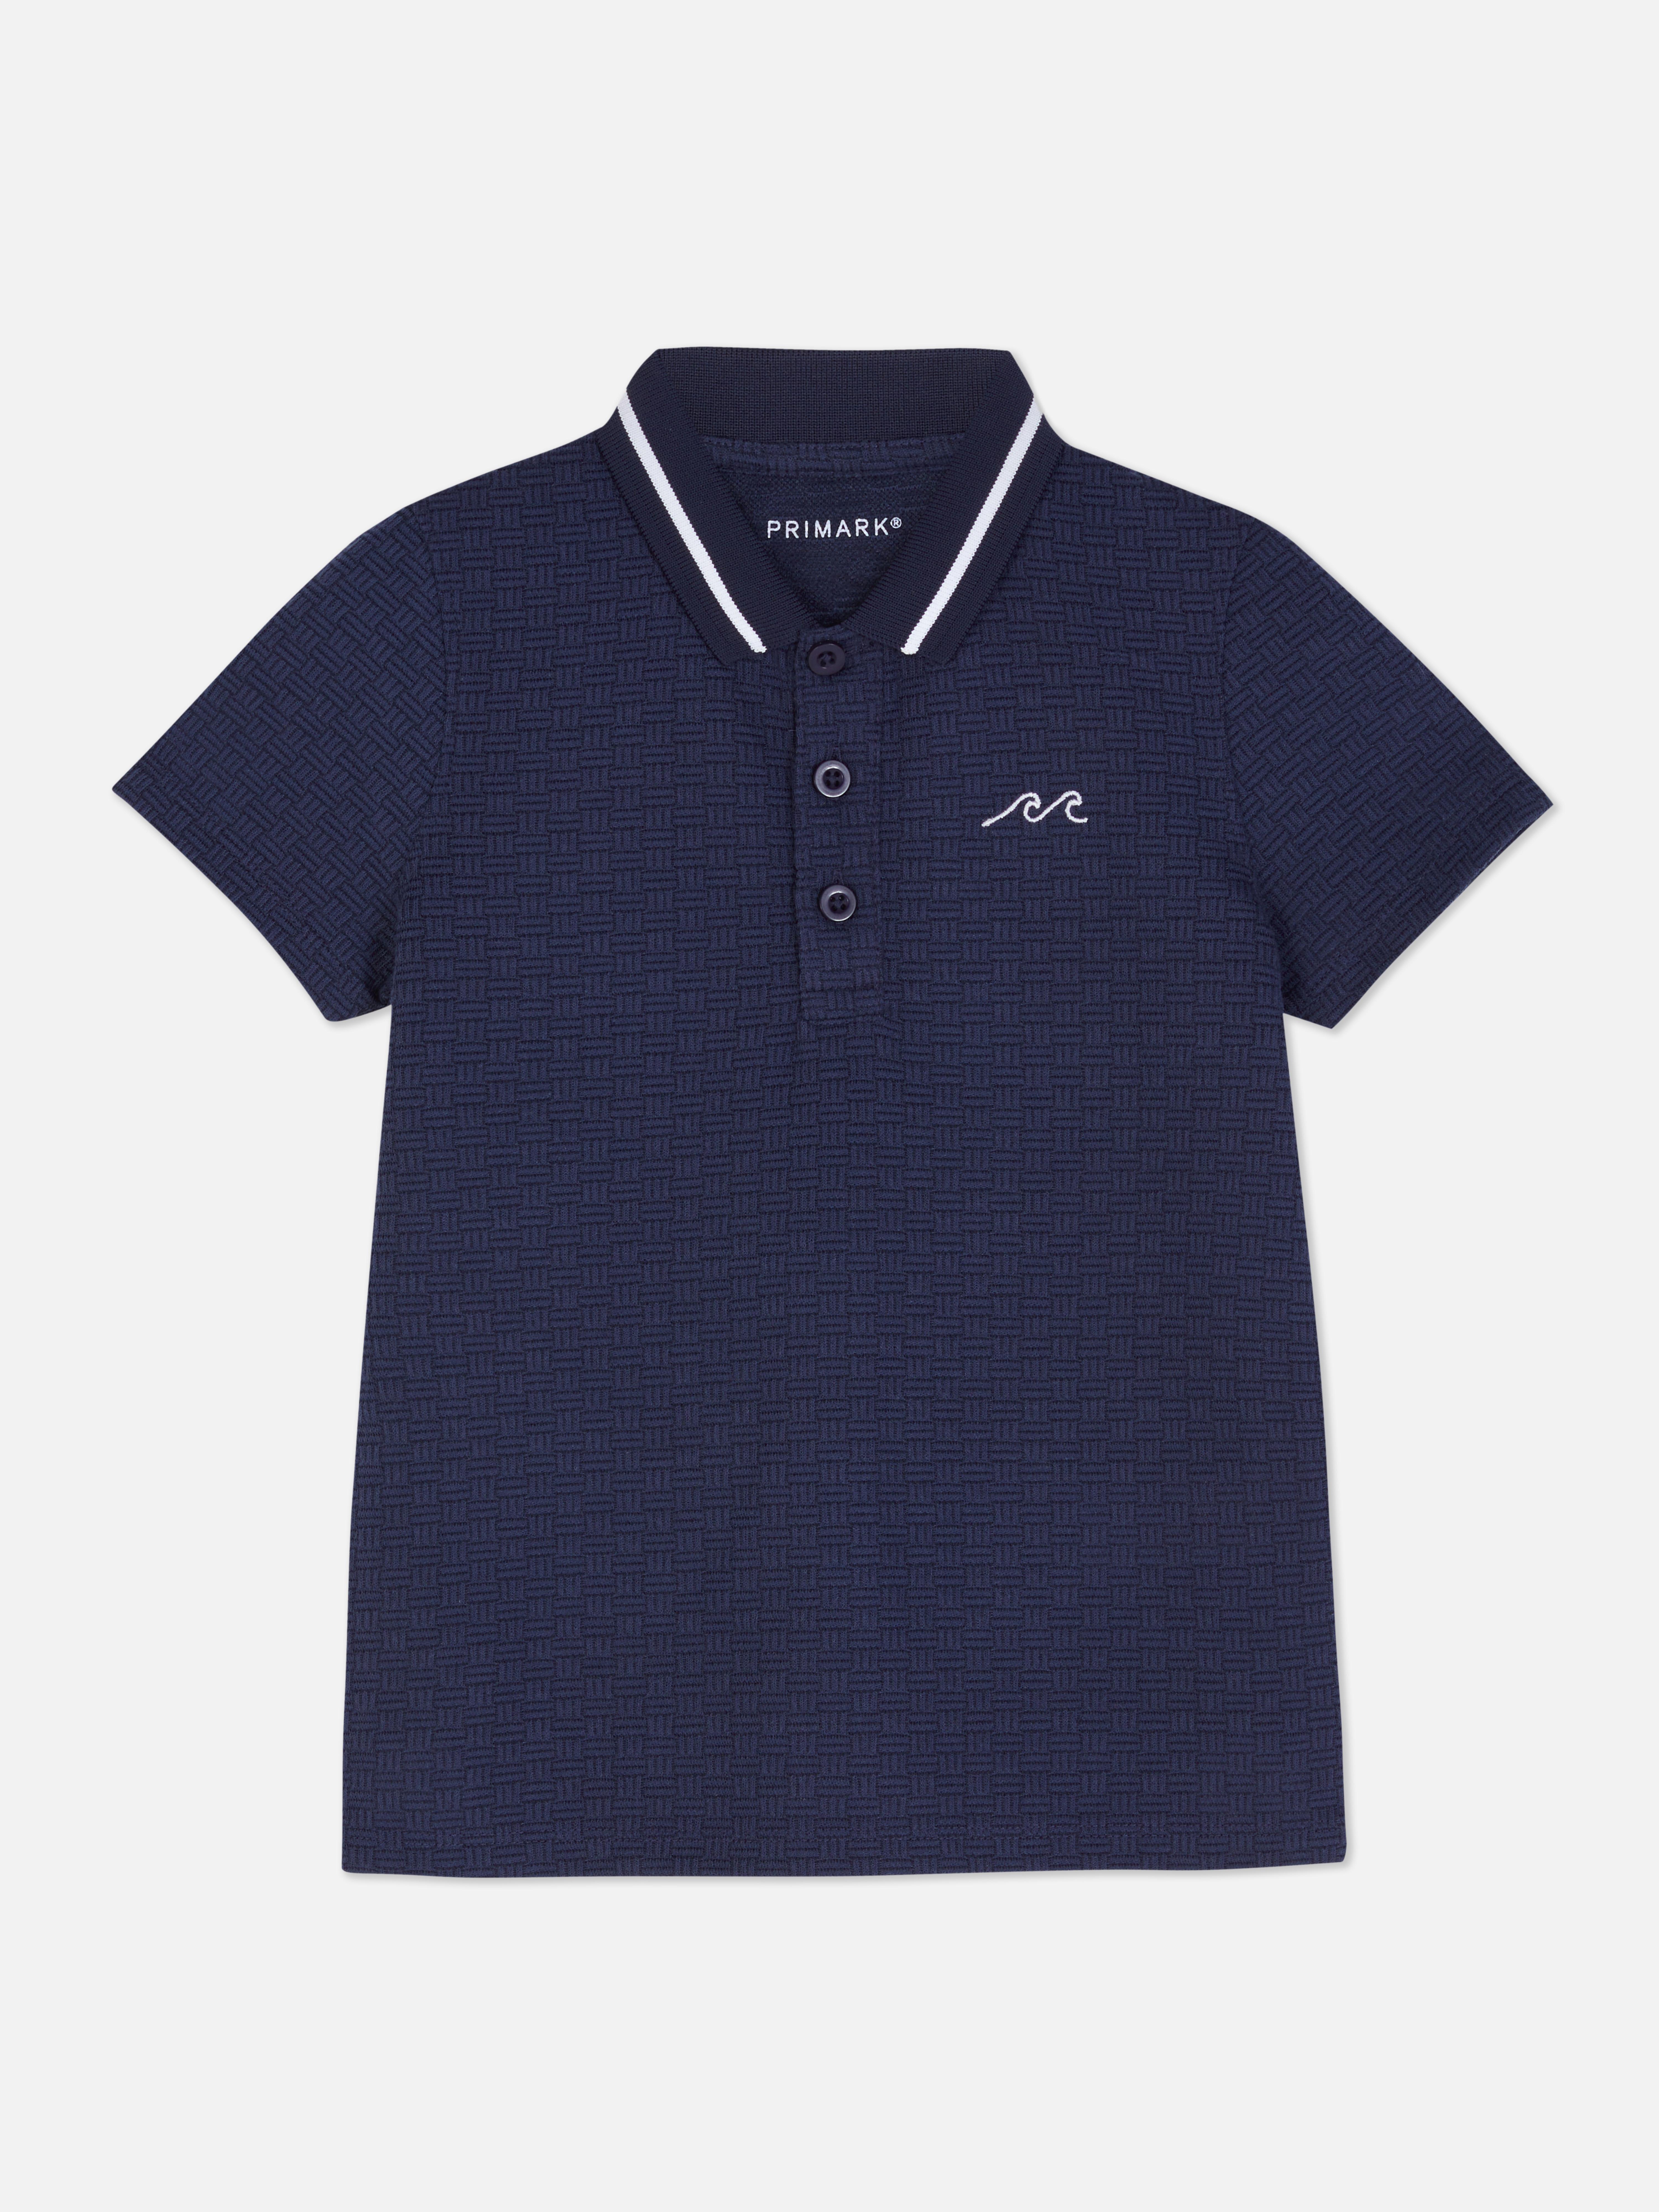 Embroidered Short Sleeve Polo Shirt